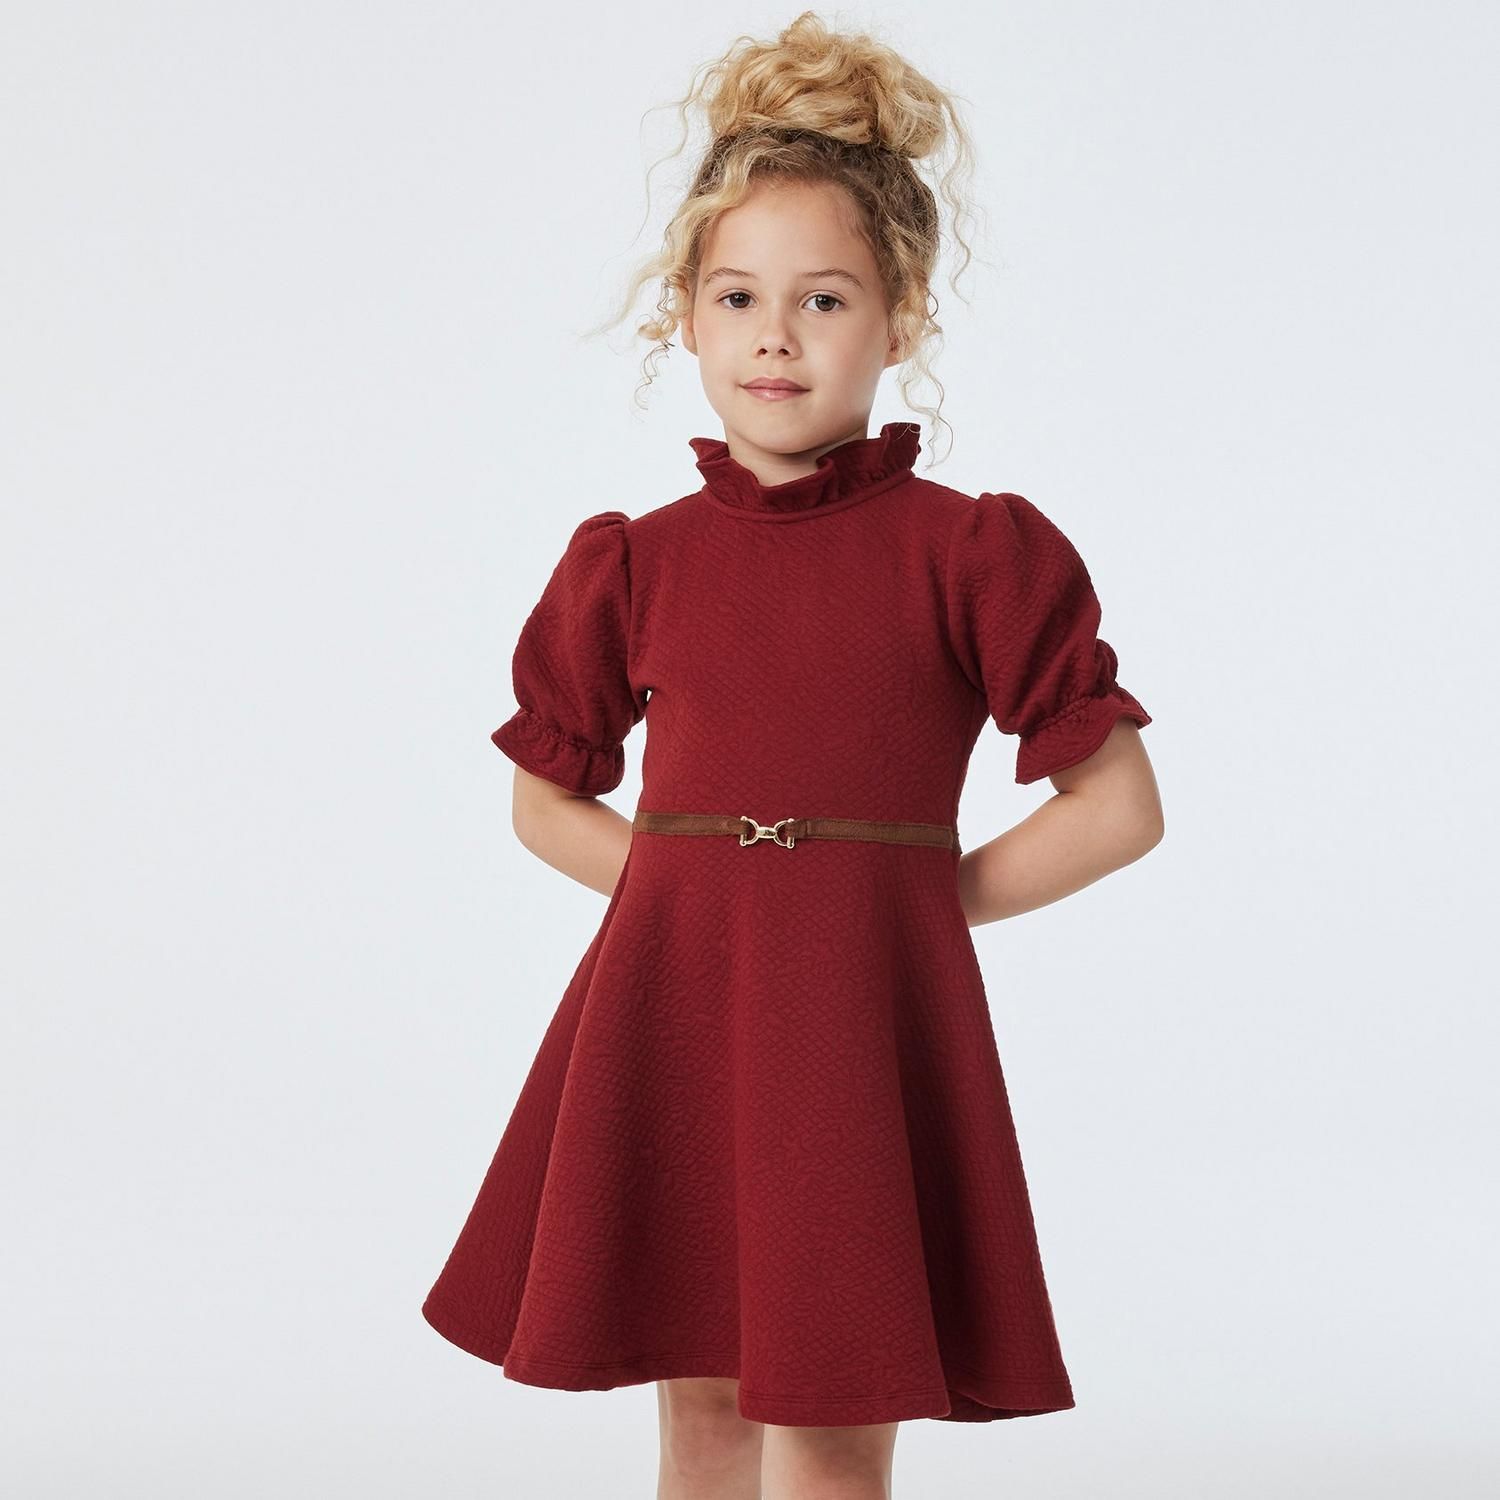 The Equestrian Chic Dress | Janie and Jack